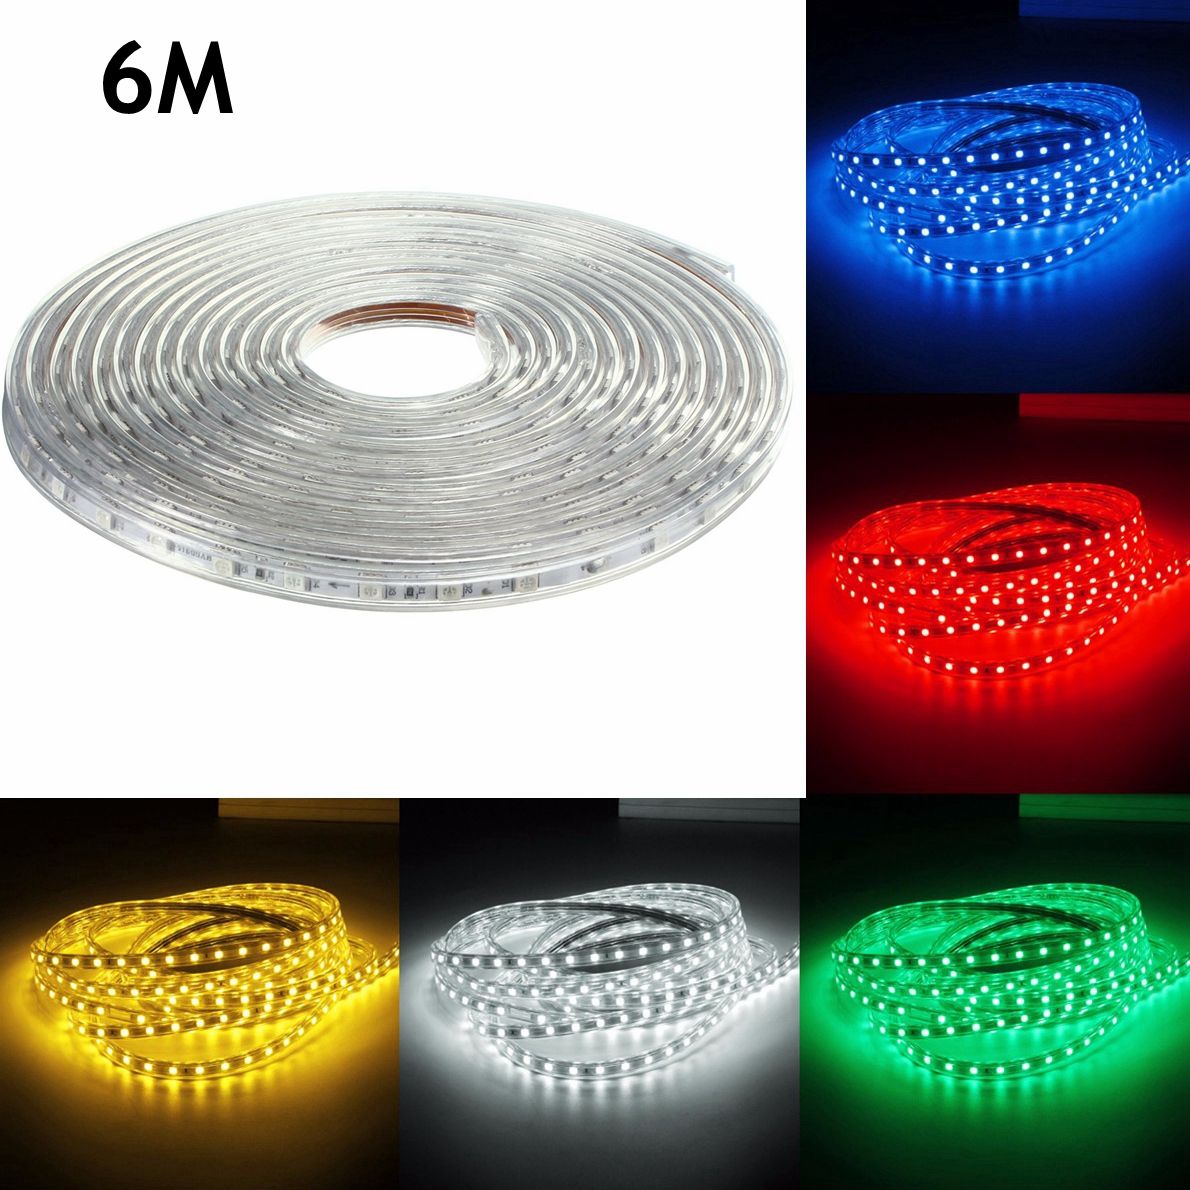 6M-5050-LED-SMD-Outdoor-Waterproof-Flexible-Tape-Rope-Strip-Light-Xmas-220V-1066362